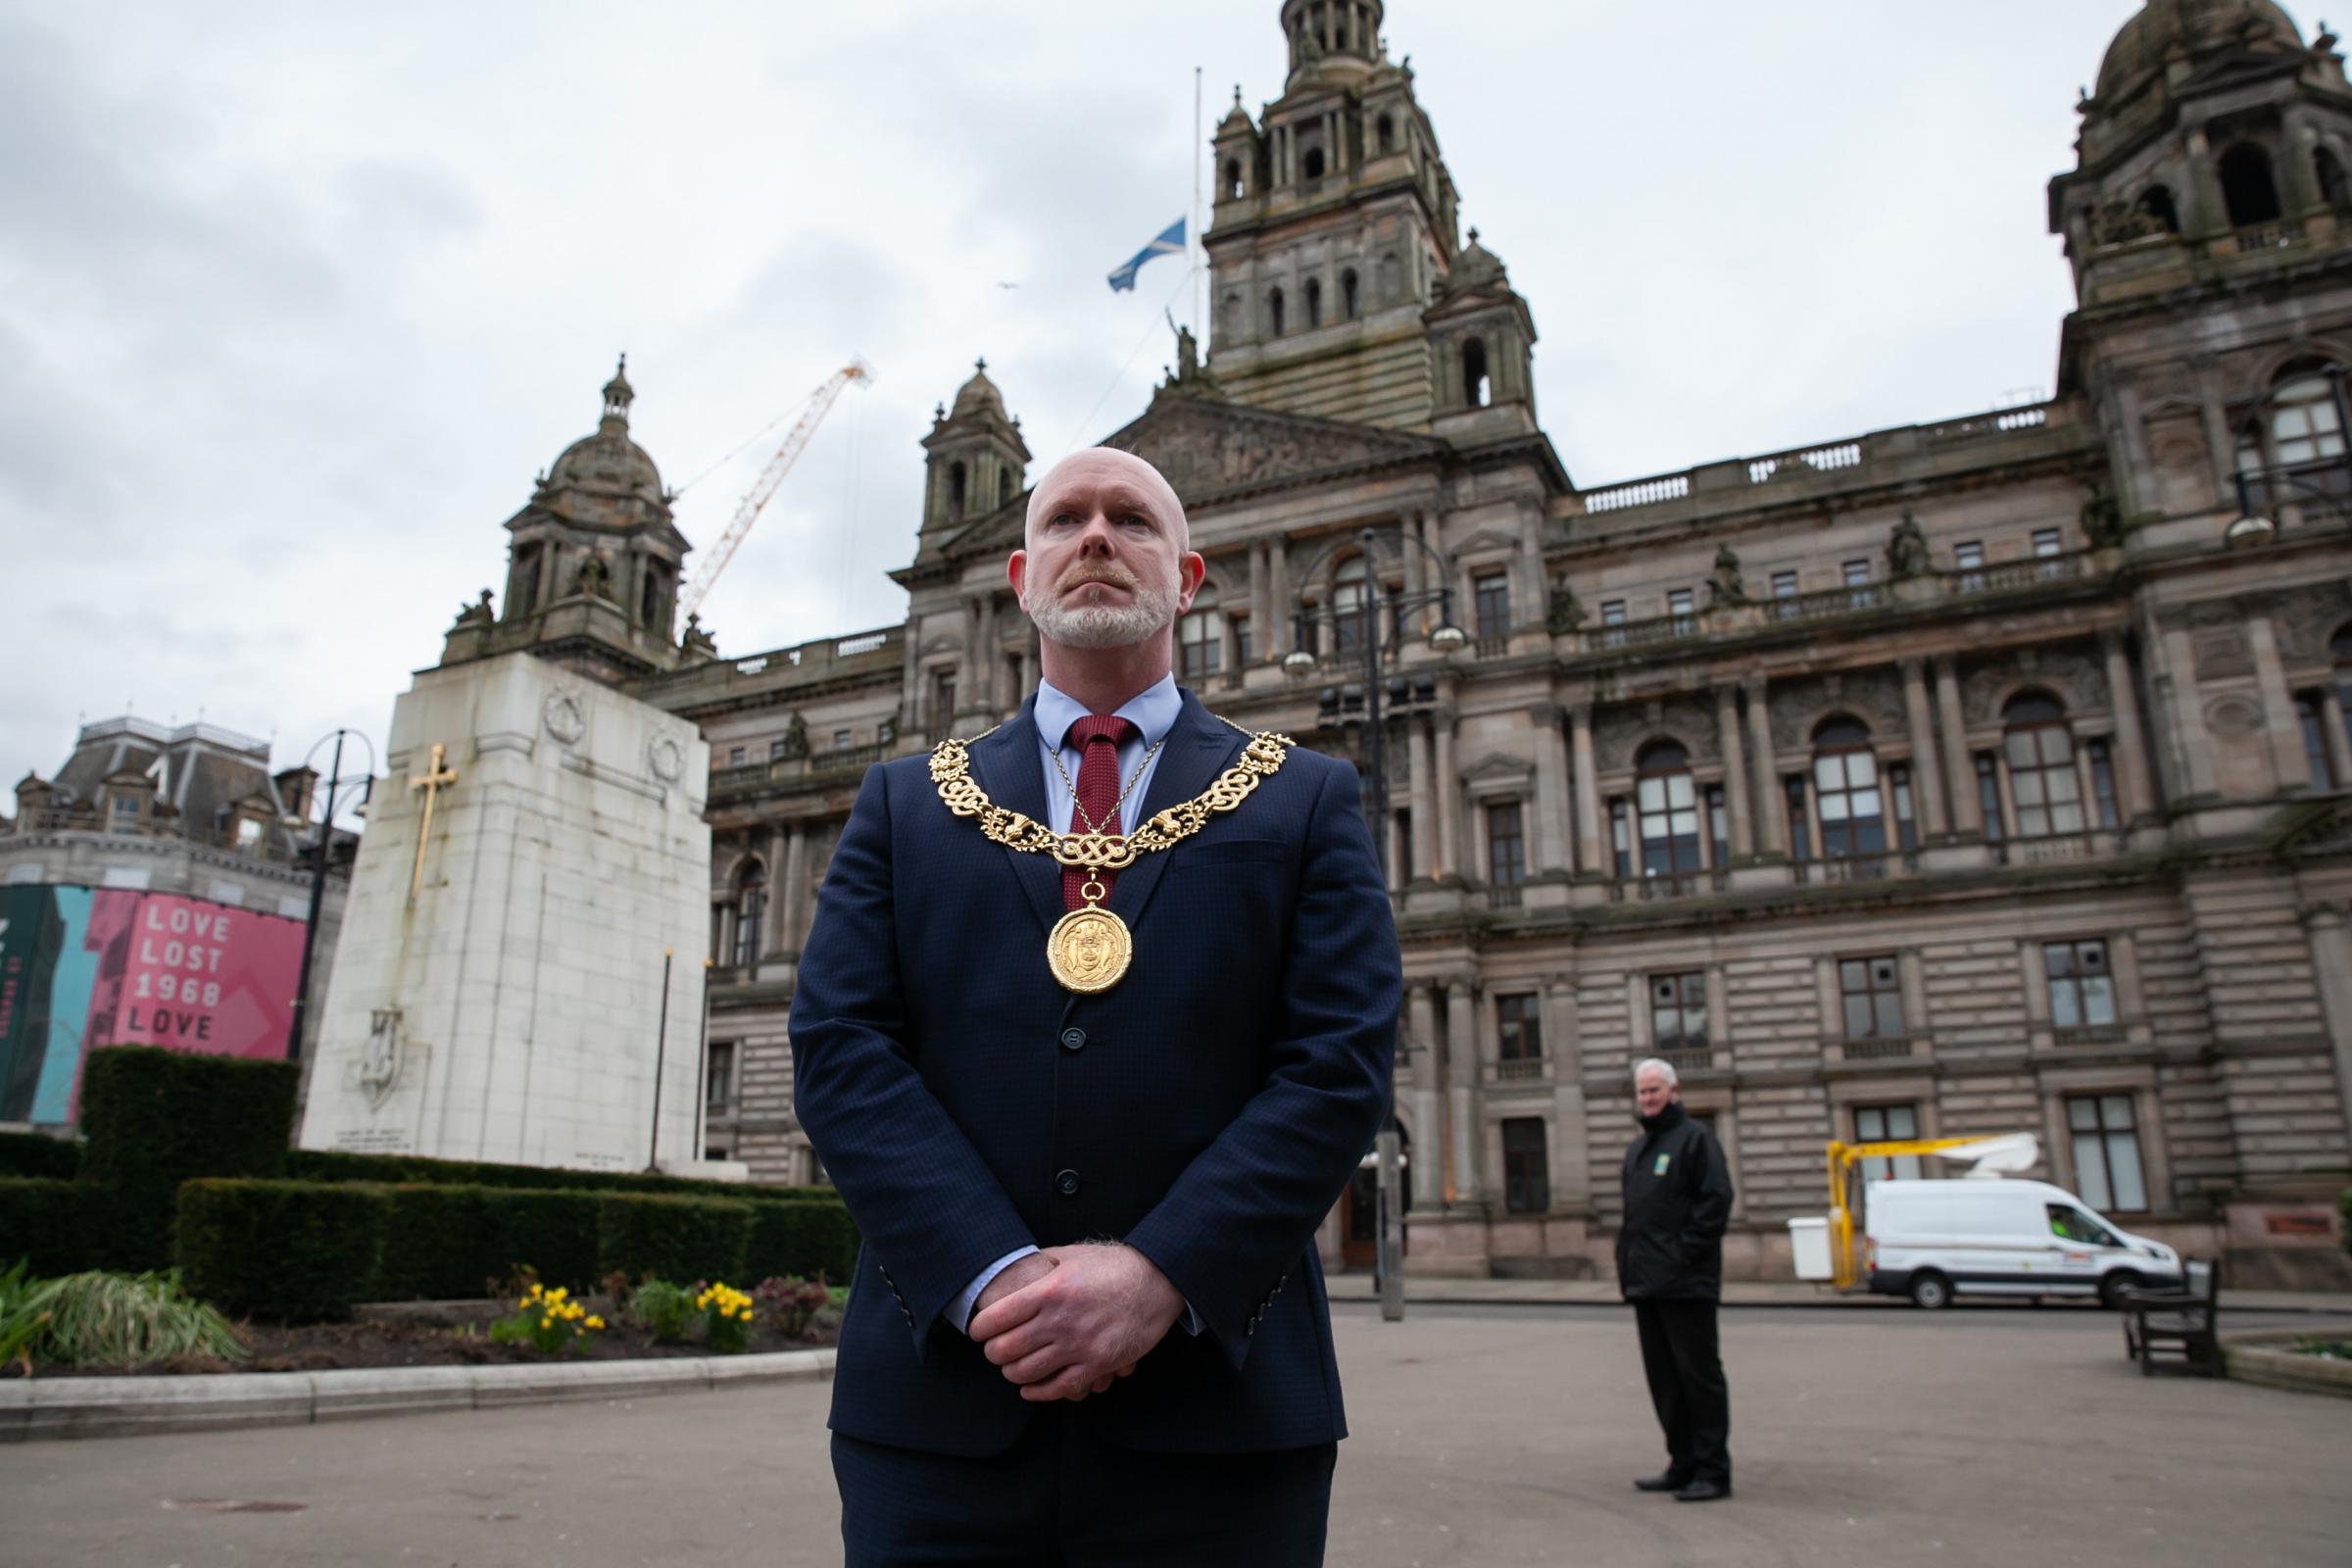 Lord Provost of Glasgow Cllr Philip Braat observes a minutes silence at midday on Tuesday 23rd March to mark the first anniversary of Covid Lockdown. The flag on the City Chambers is at half mast. Photograph by Colin Mearns.